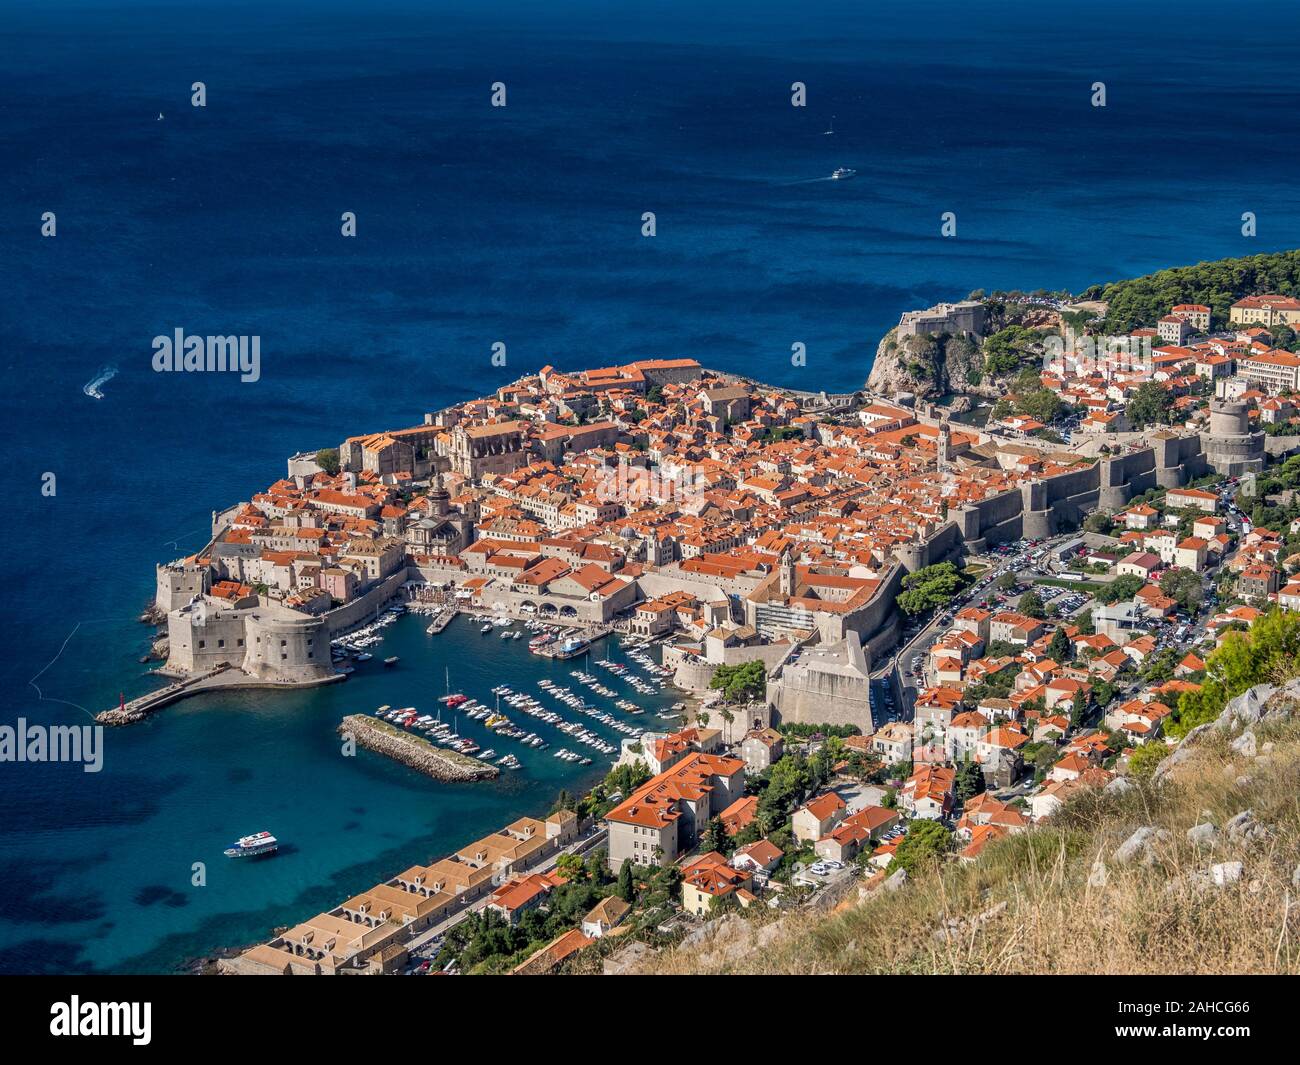 Aerial view of Dubronik and its walls Dubronik, Croatia September, 20, 2019 Stock Photo